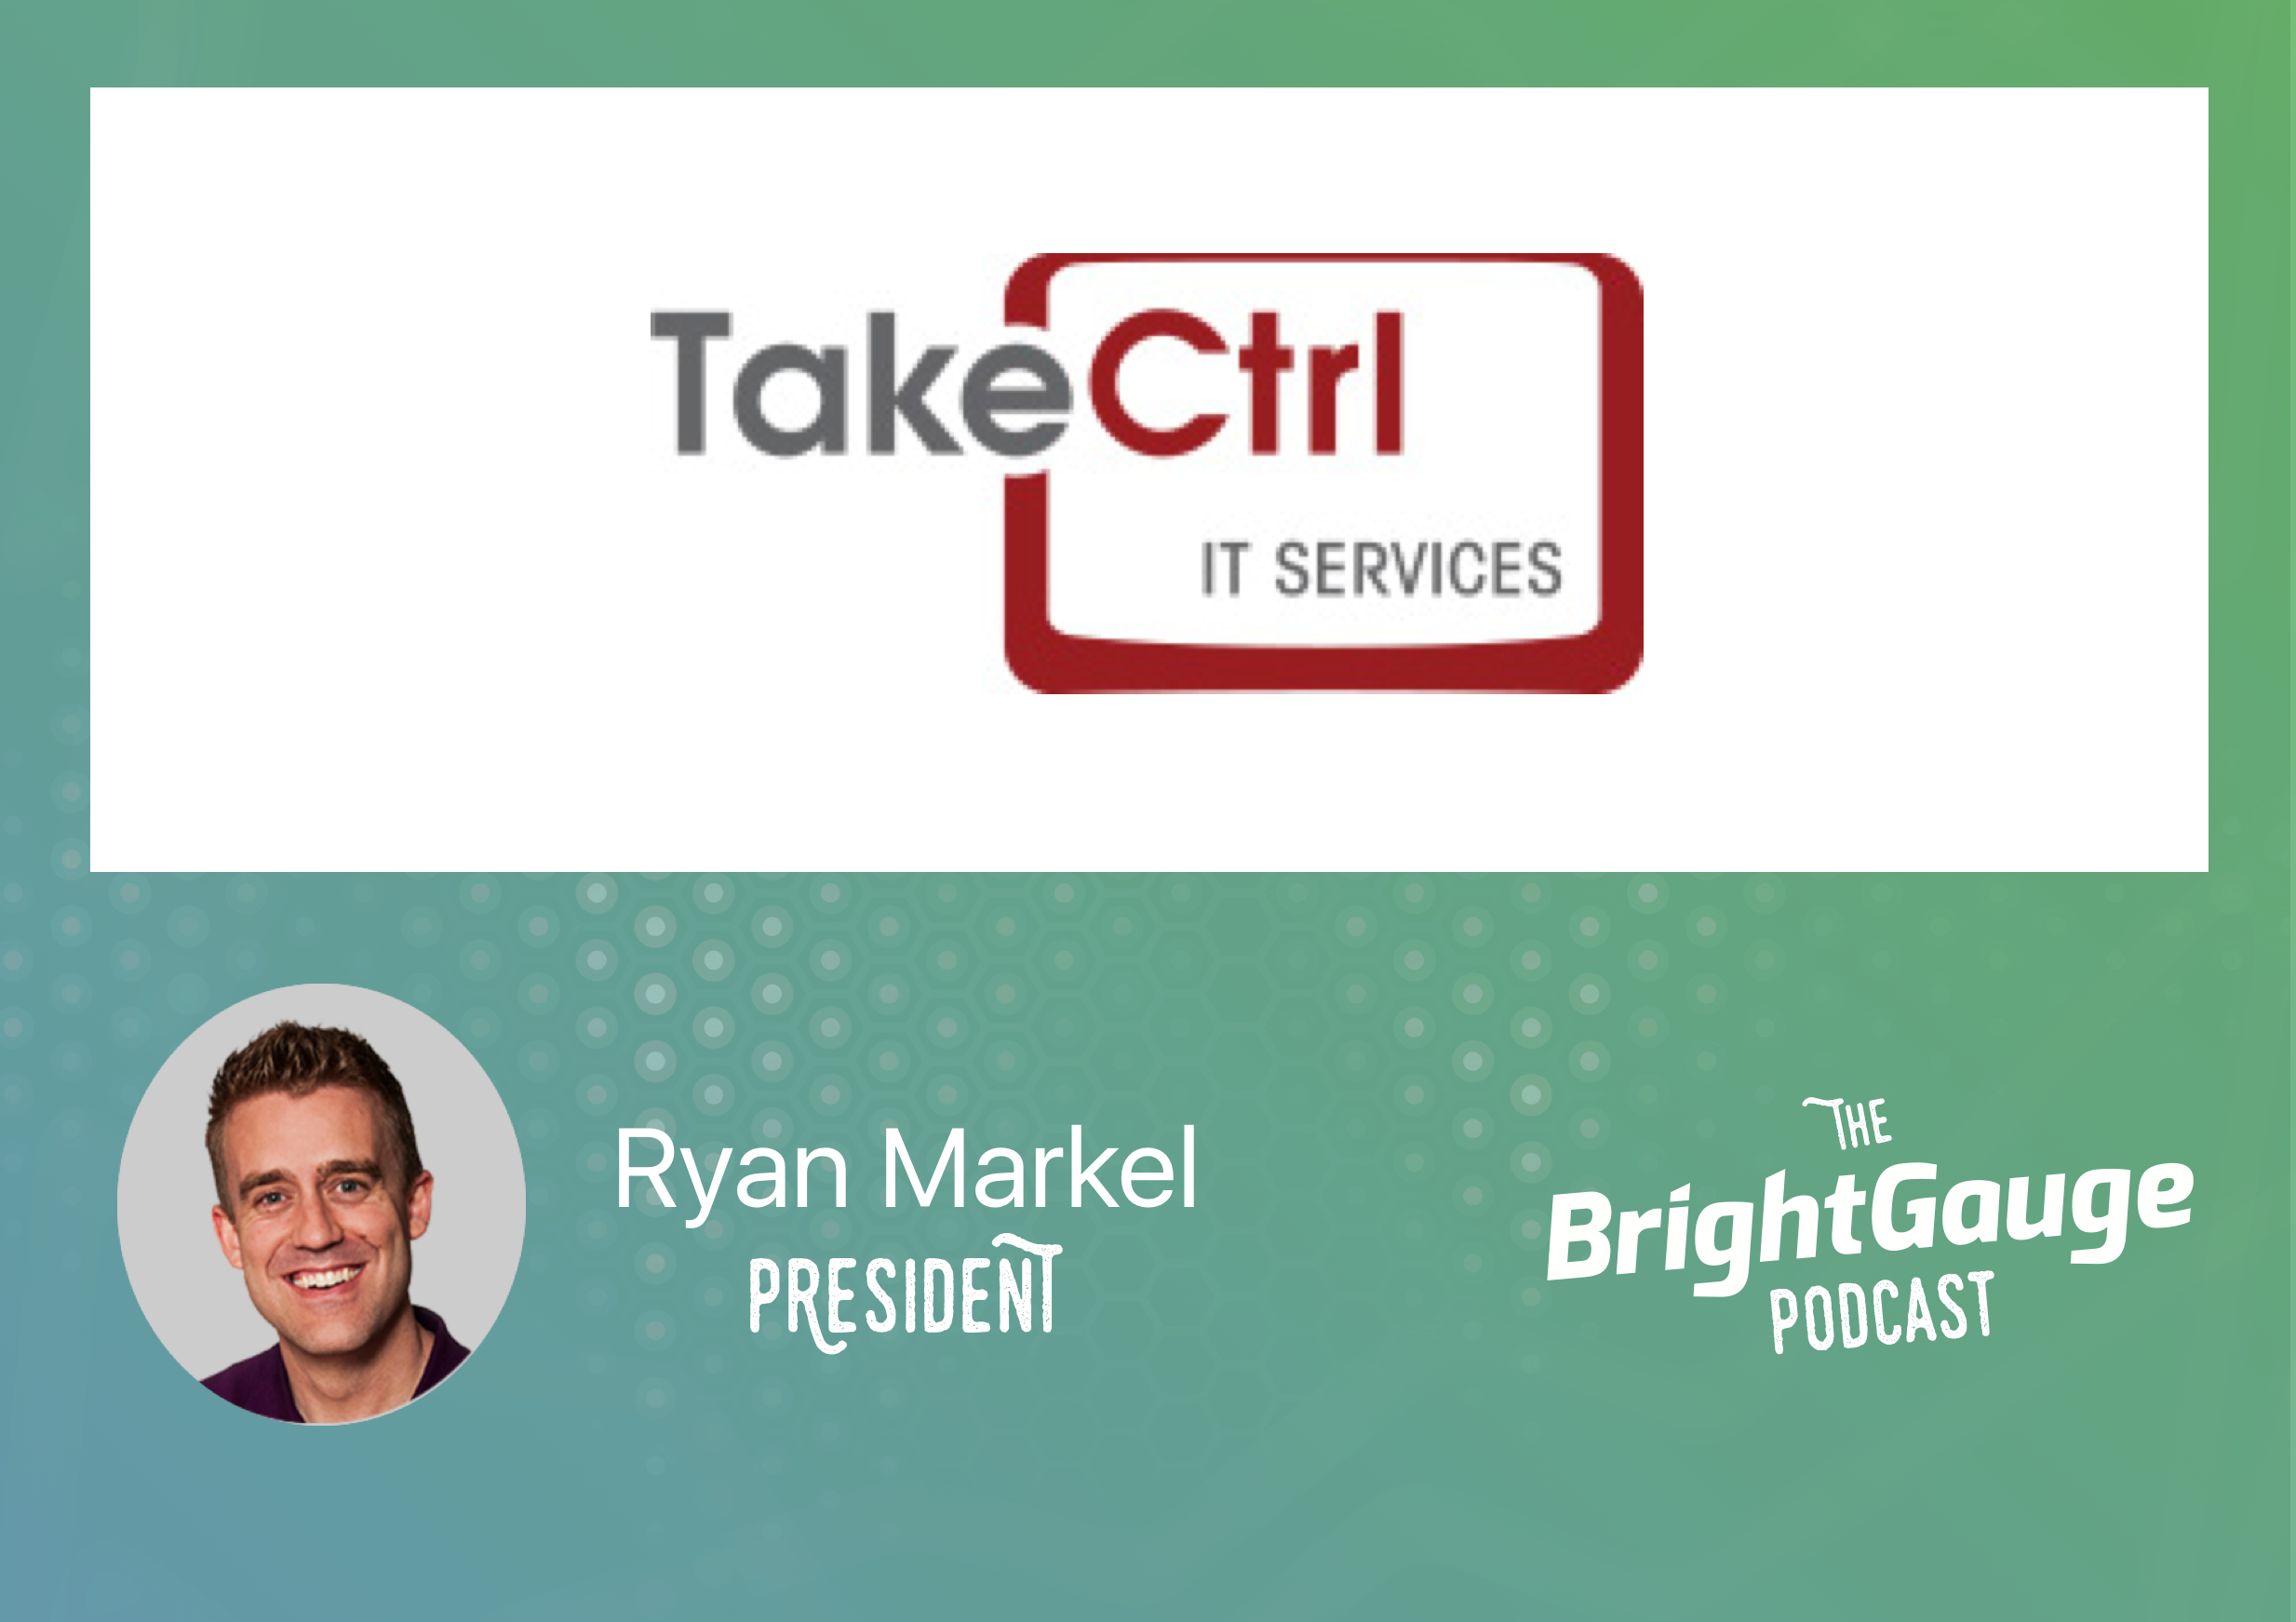 [Podcast] Episode 21 with Ryan Markel of Take Ctrl